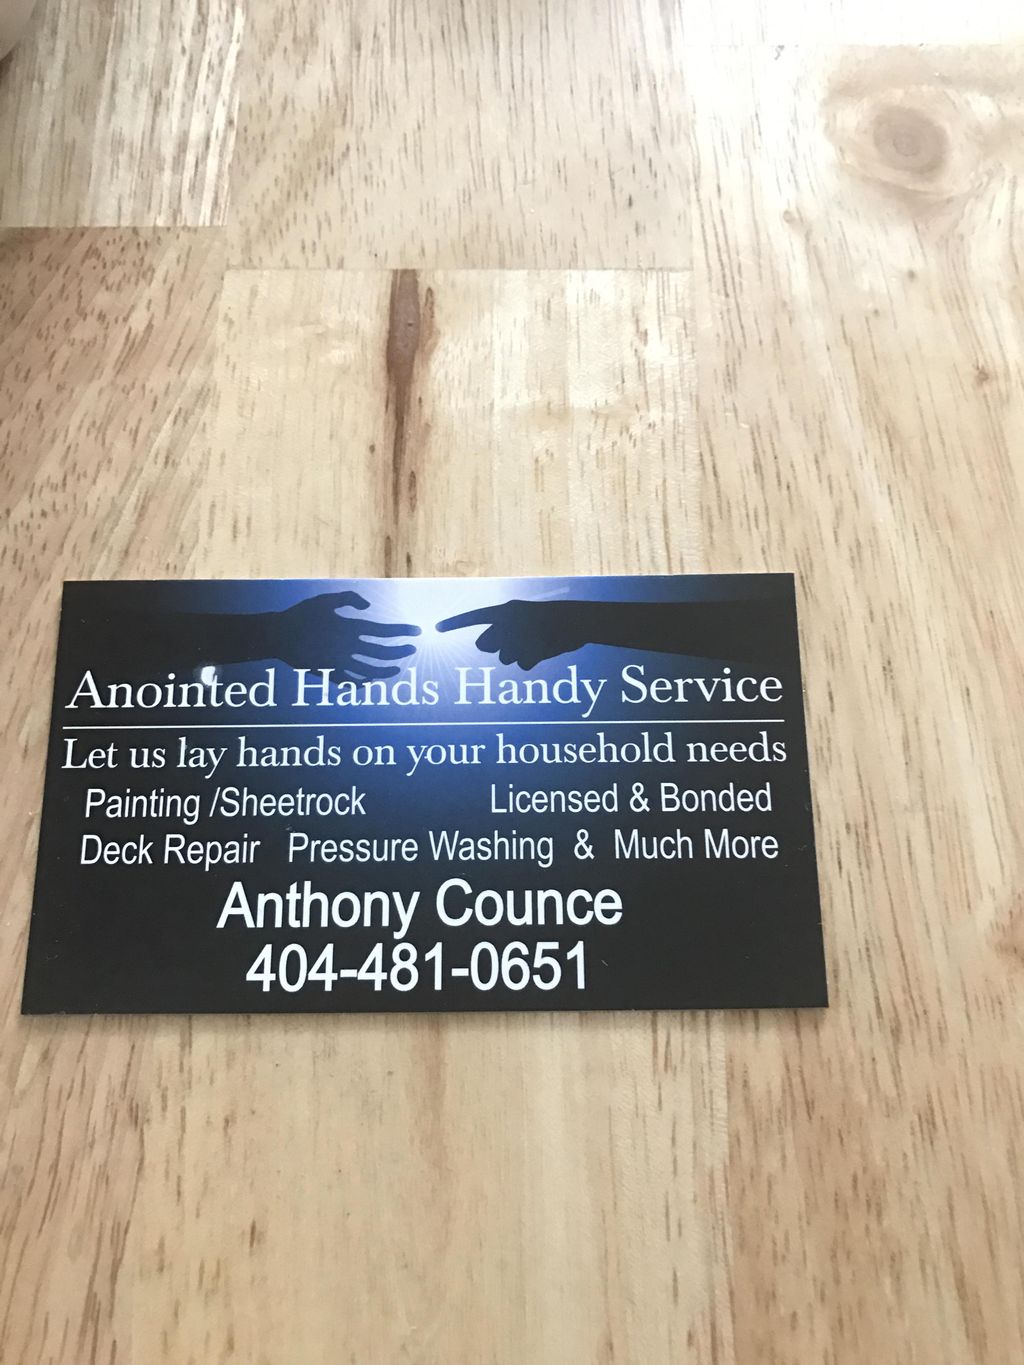 Anointed Hands Handy Service